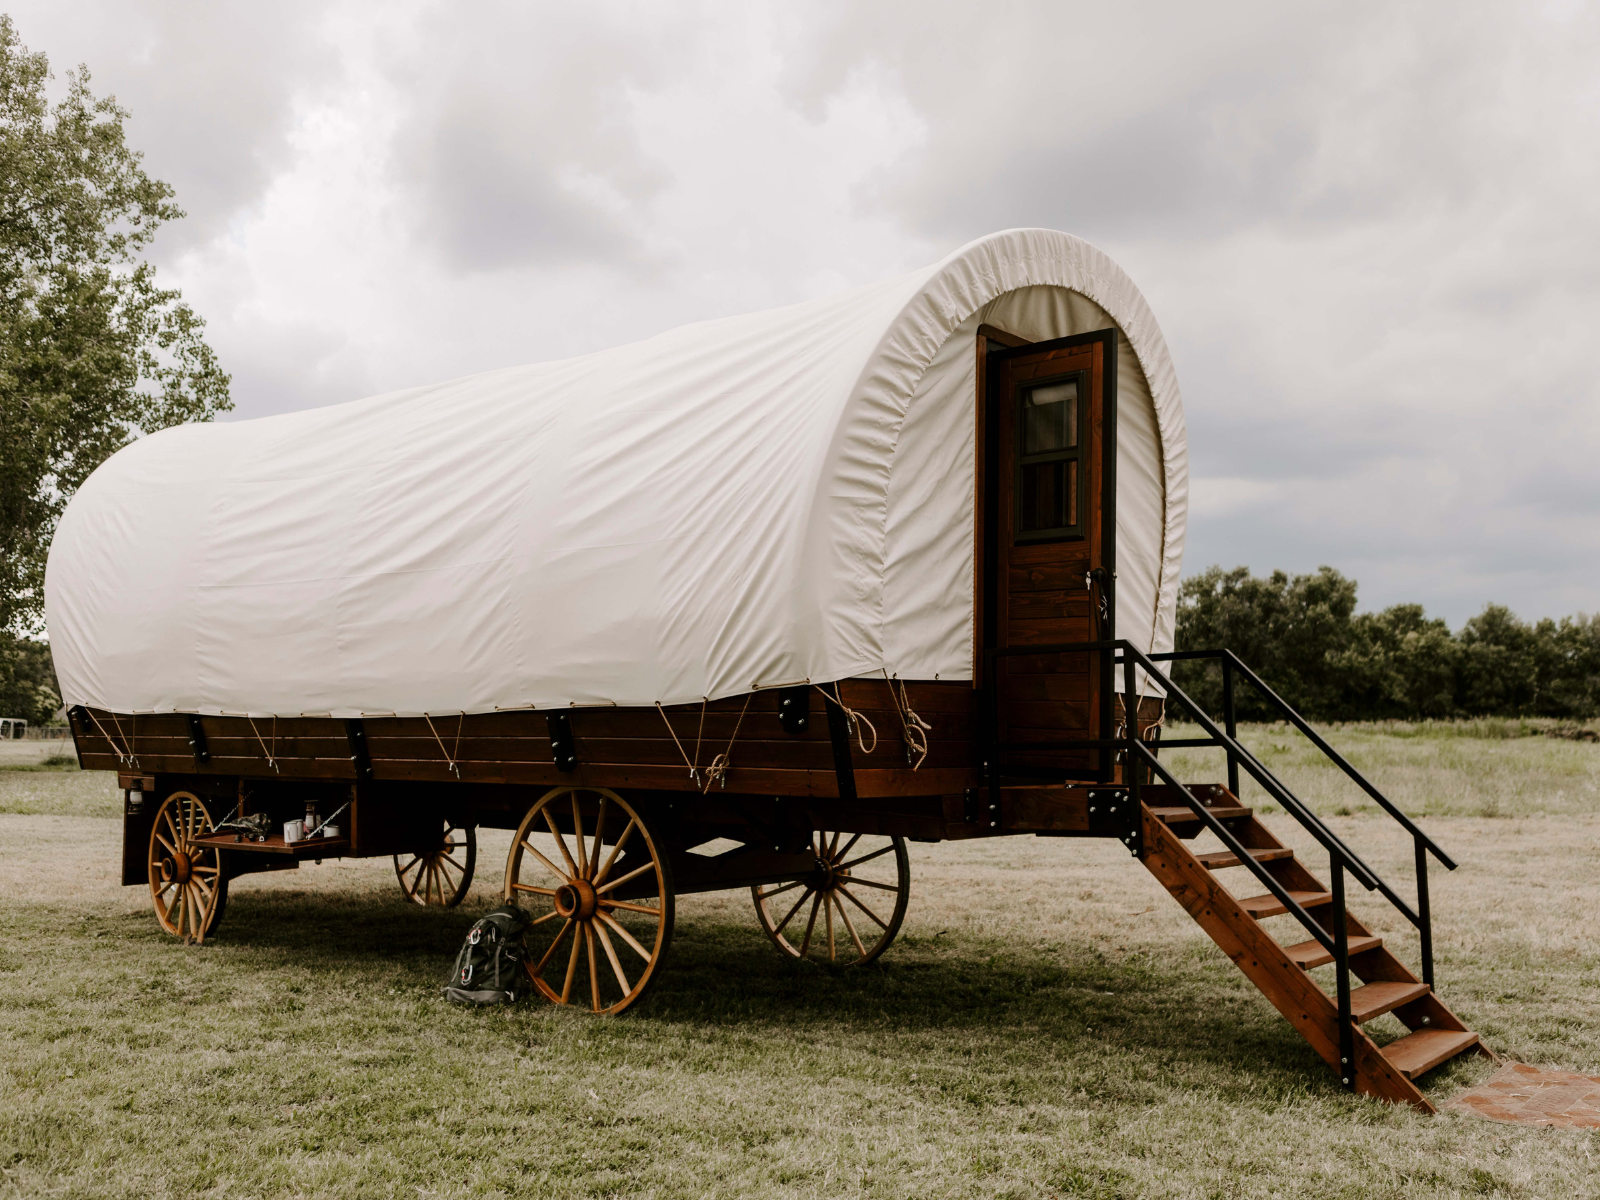 PlainsCraft Covered Wagons is proud to be a sponsor of the 2023 Kansas City ARVC Outdoor Hospitality Show and Expo.